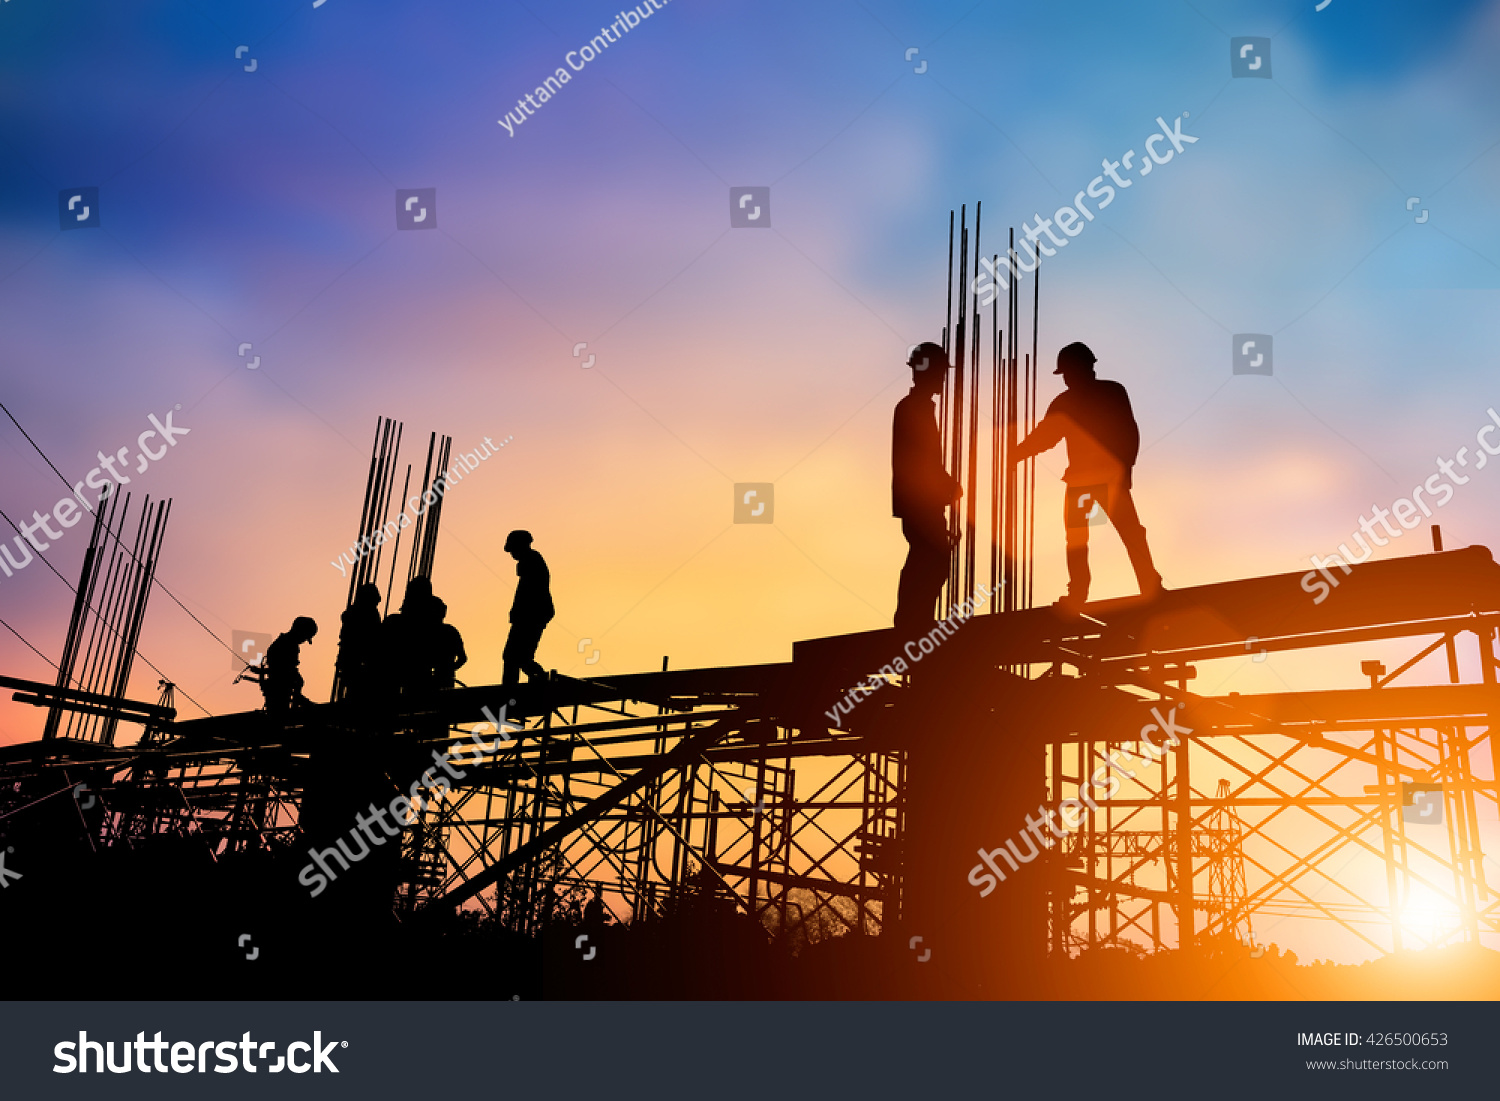 Silhouette engineer standing orders for construction crews to work on high ground  heavy industry and safety concept over blurred natural background sunset pastel